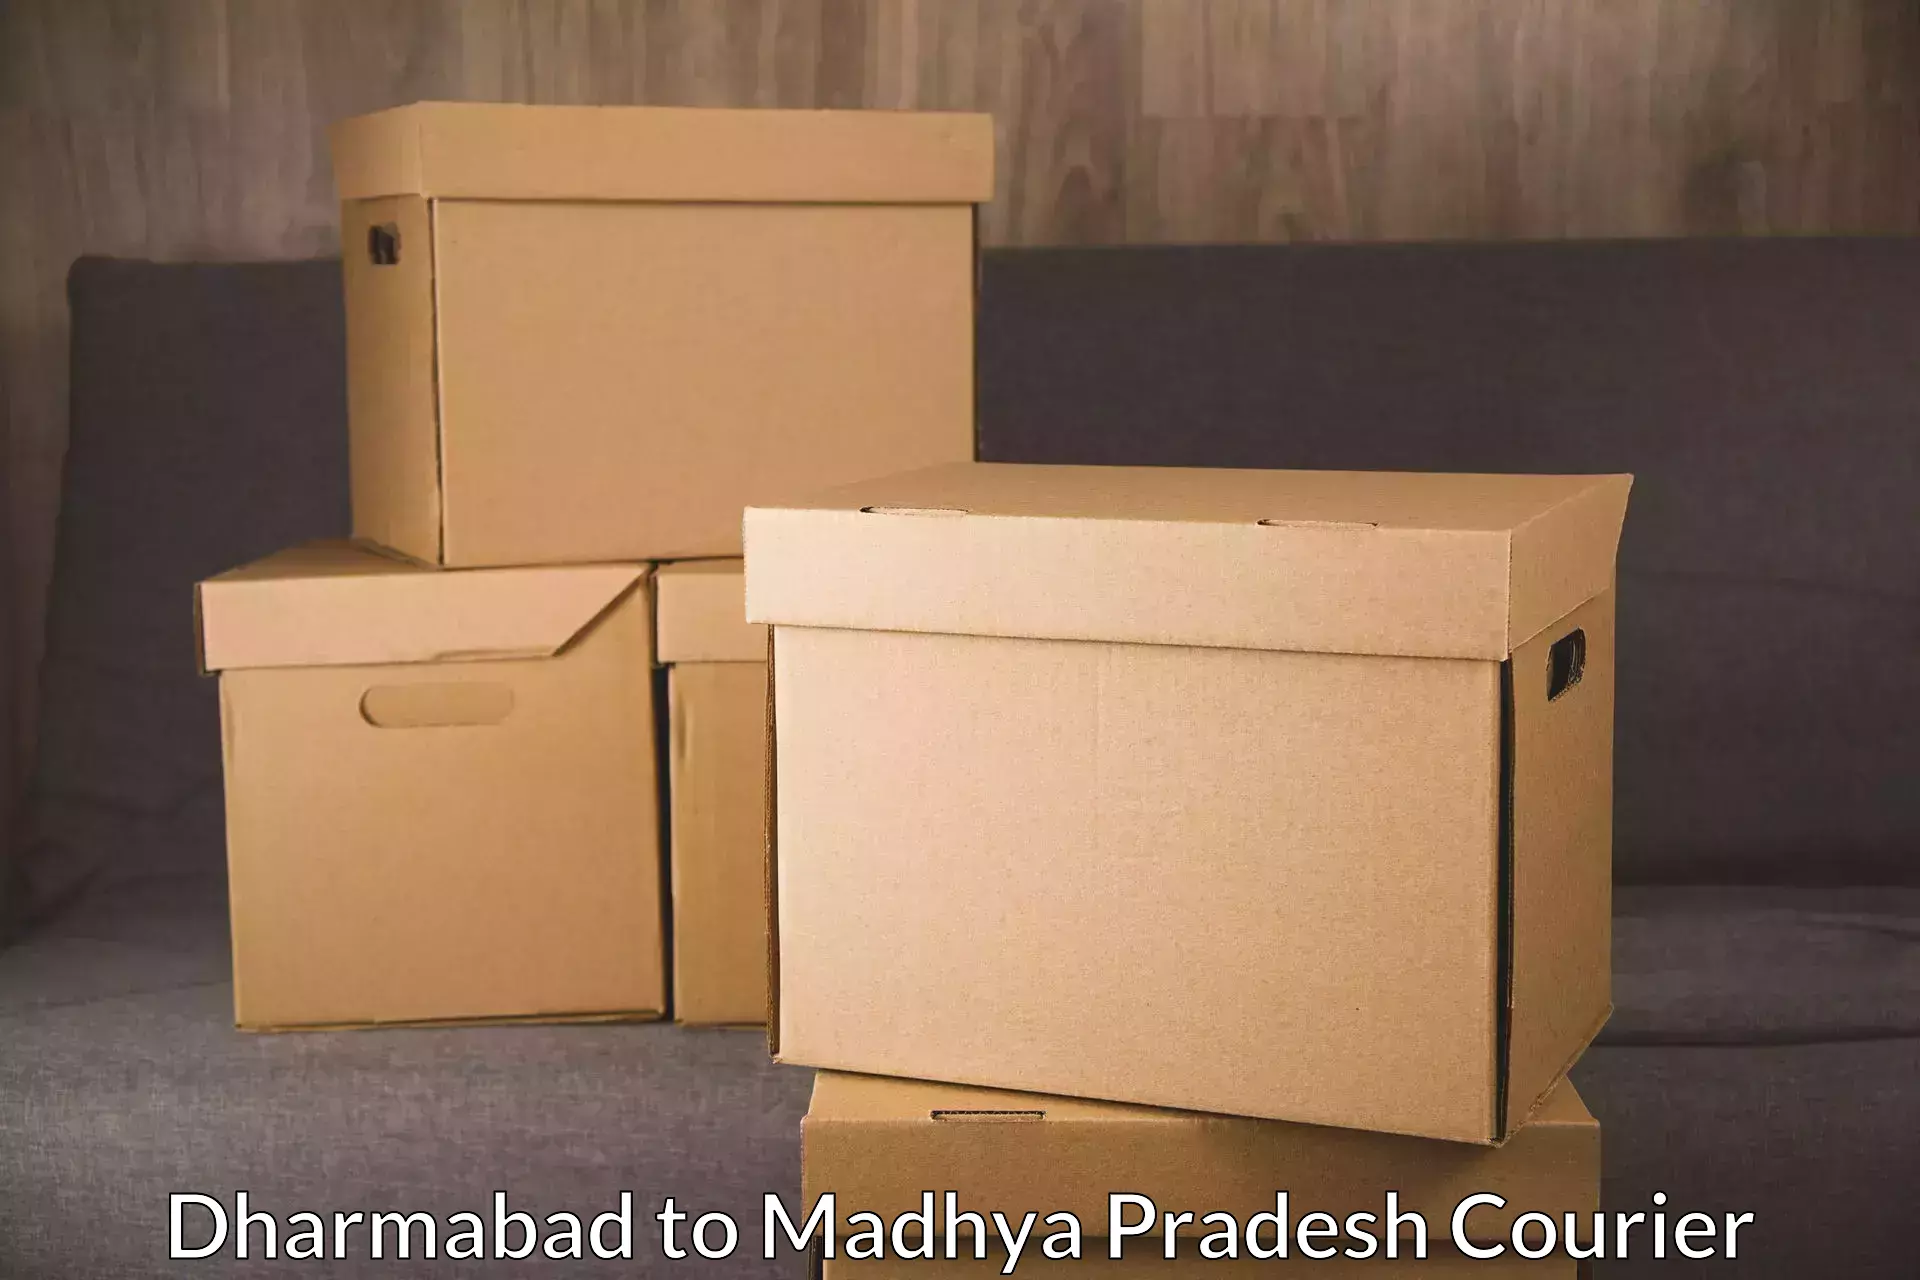 24-hour courier service Dharmabad to Sagar